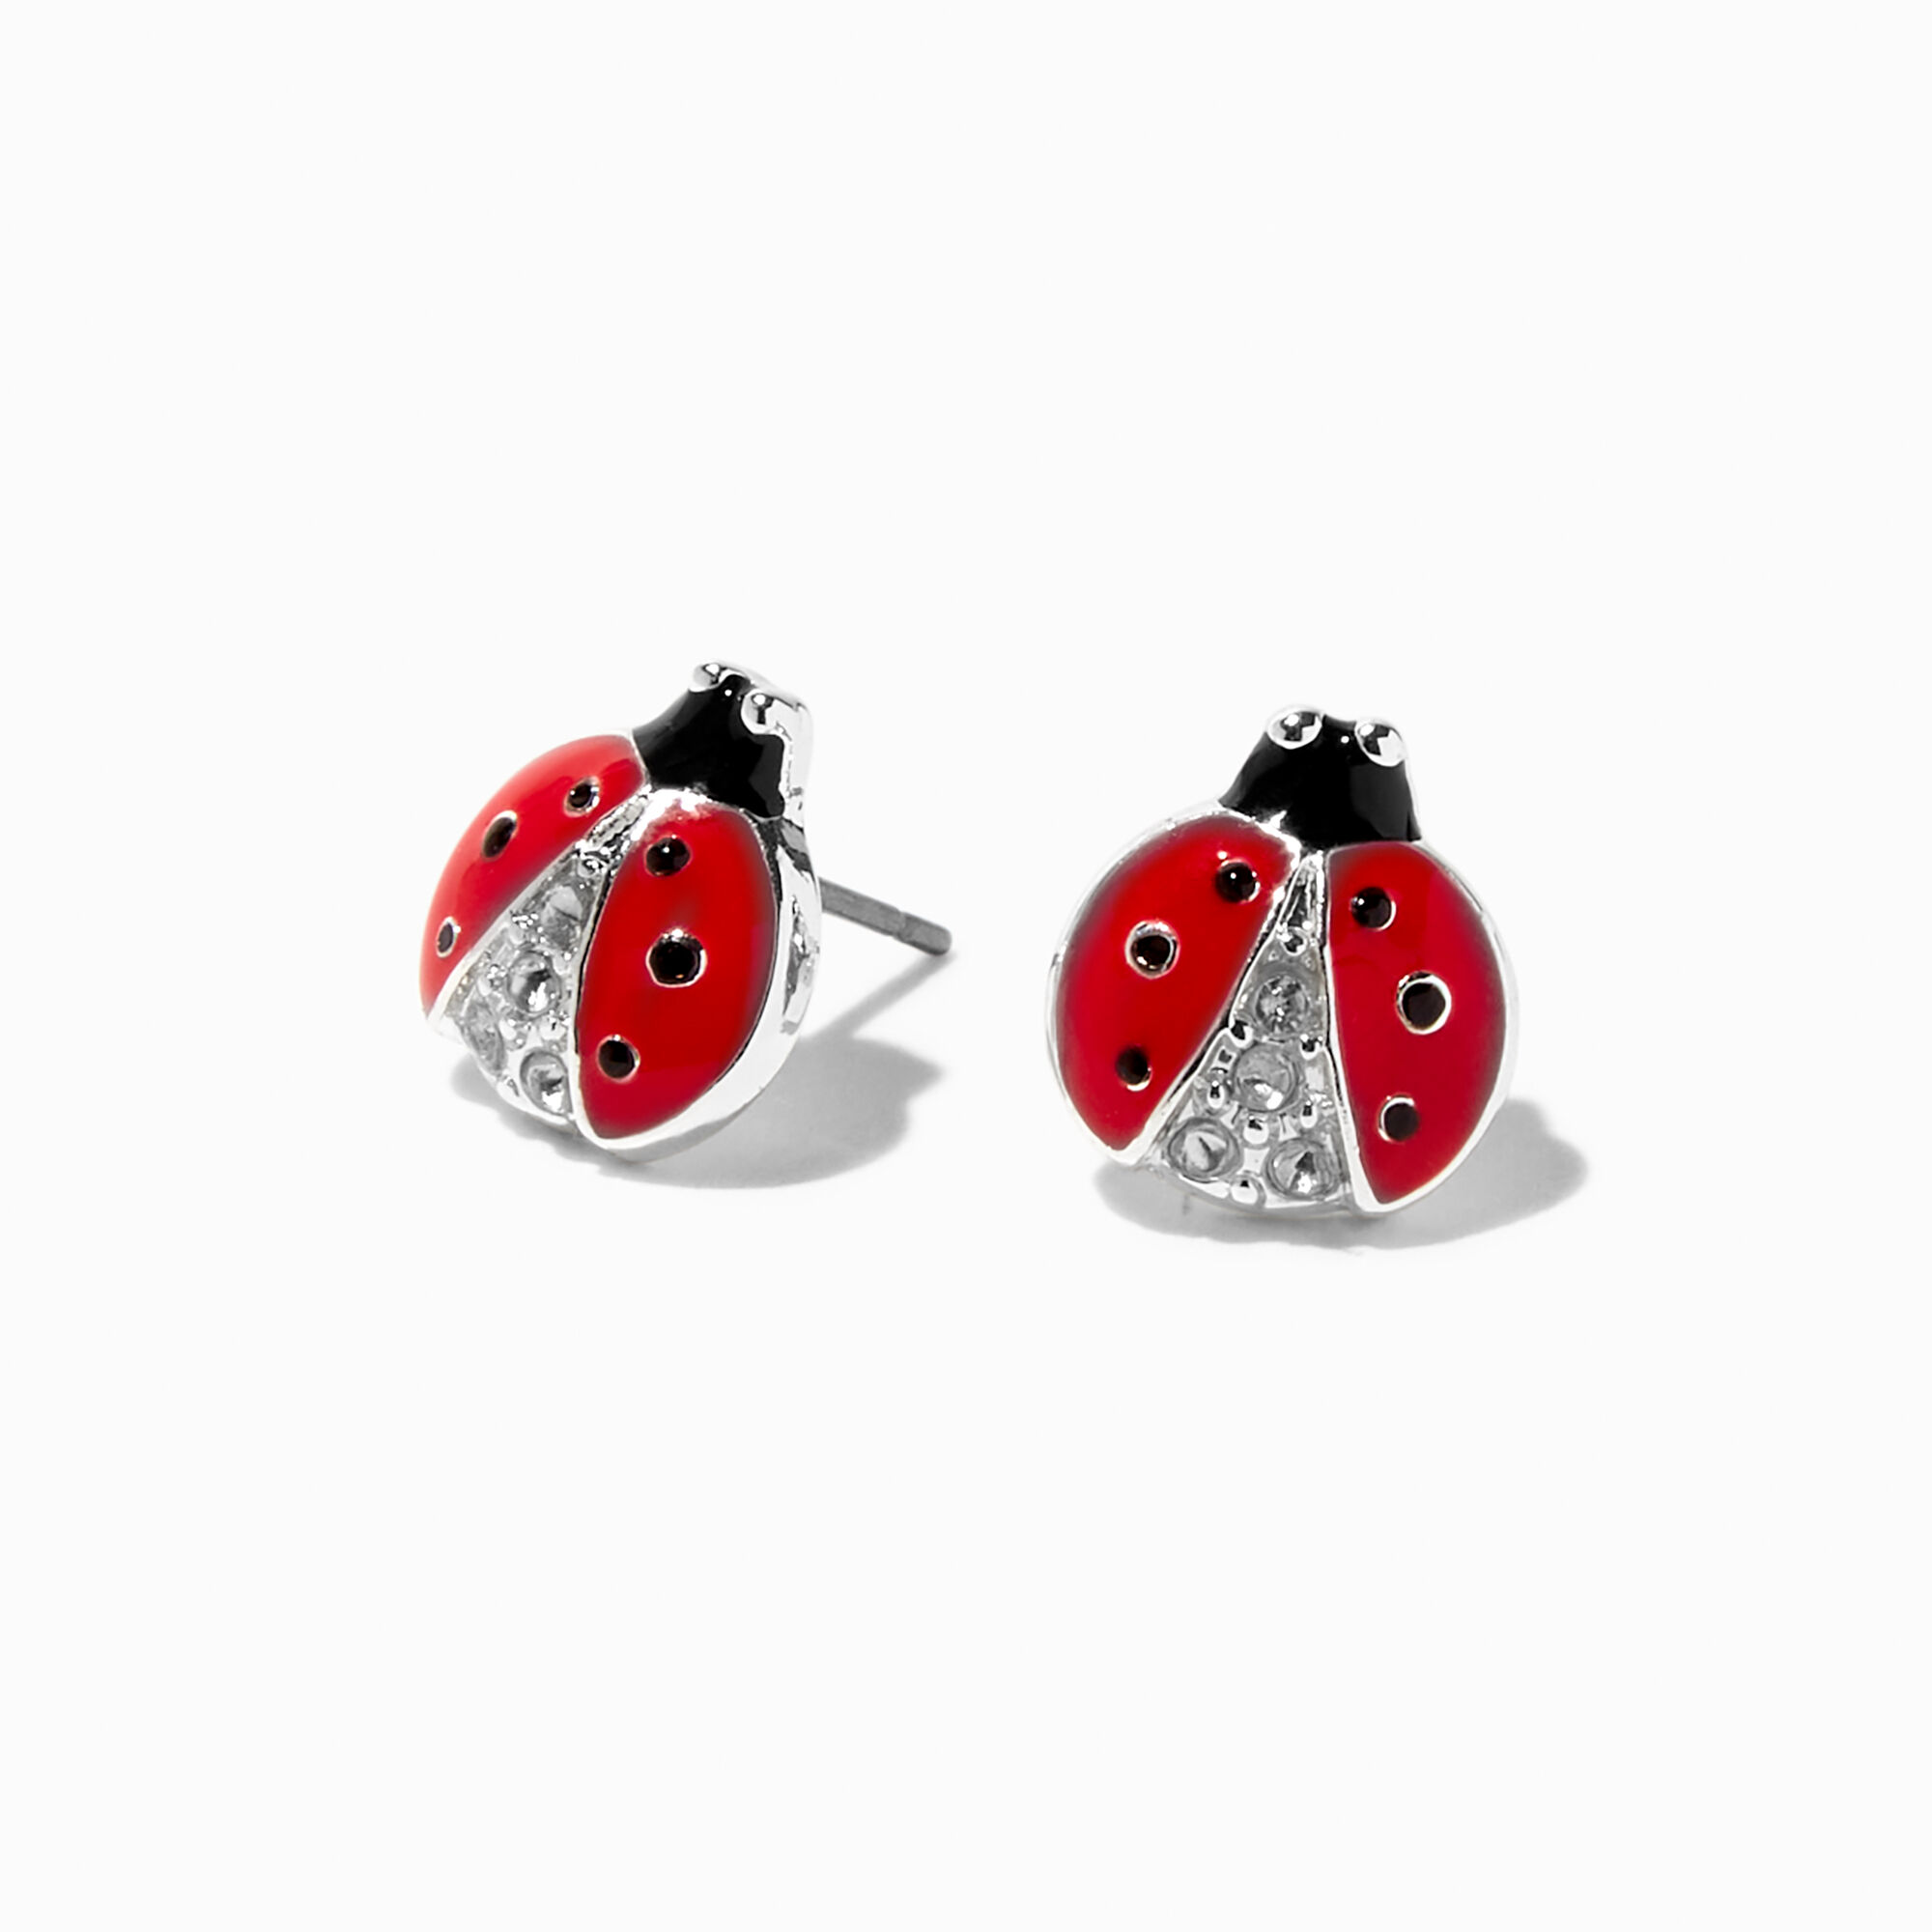 View Claires Crystal Ladybug Stud Earrings Red information